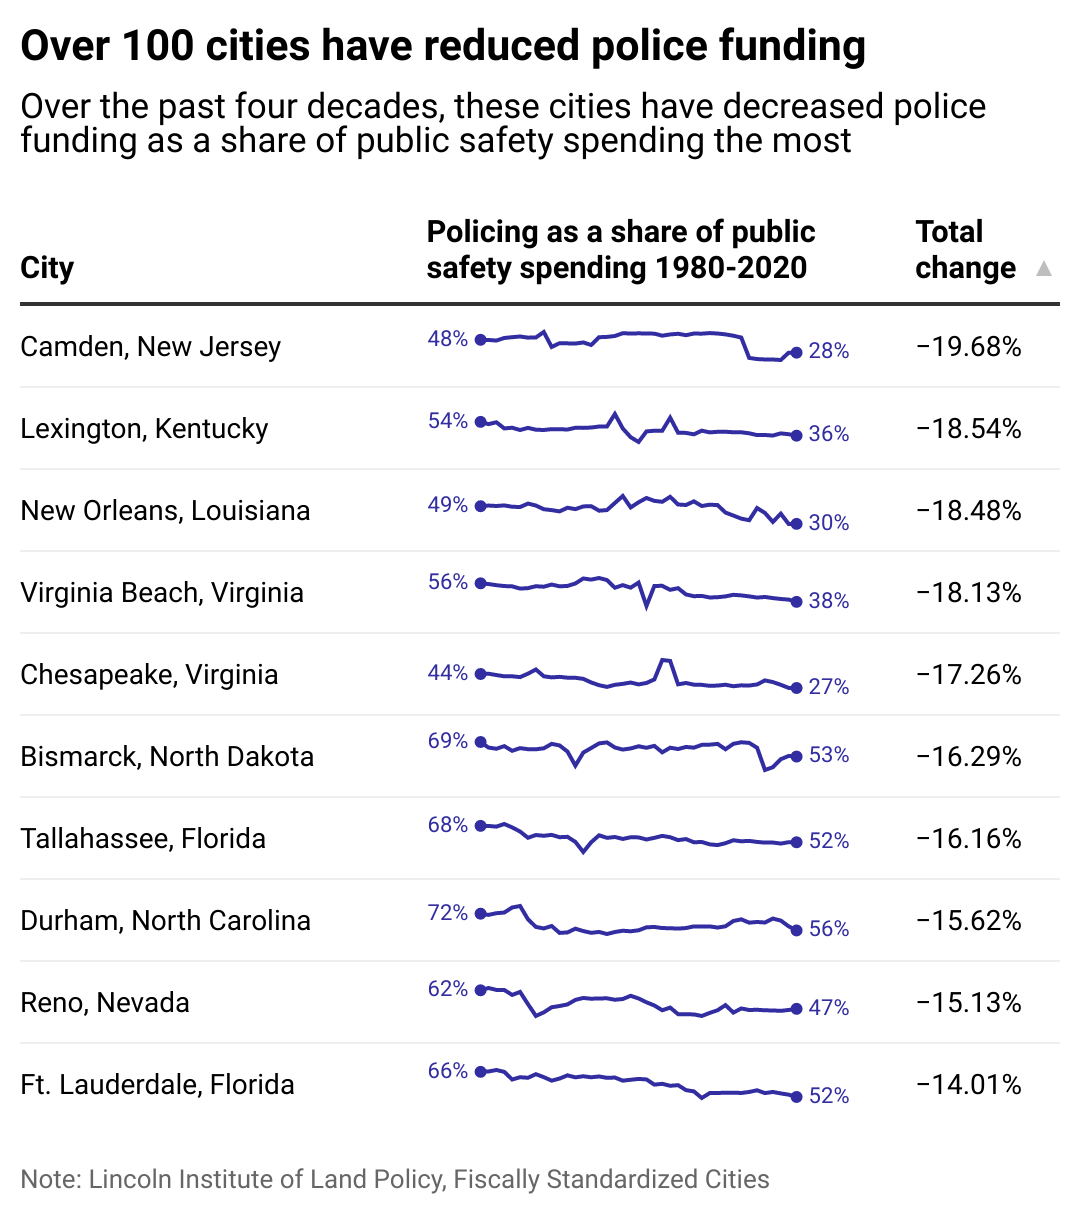 A list showing ten cities that have reduced police funding the most.